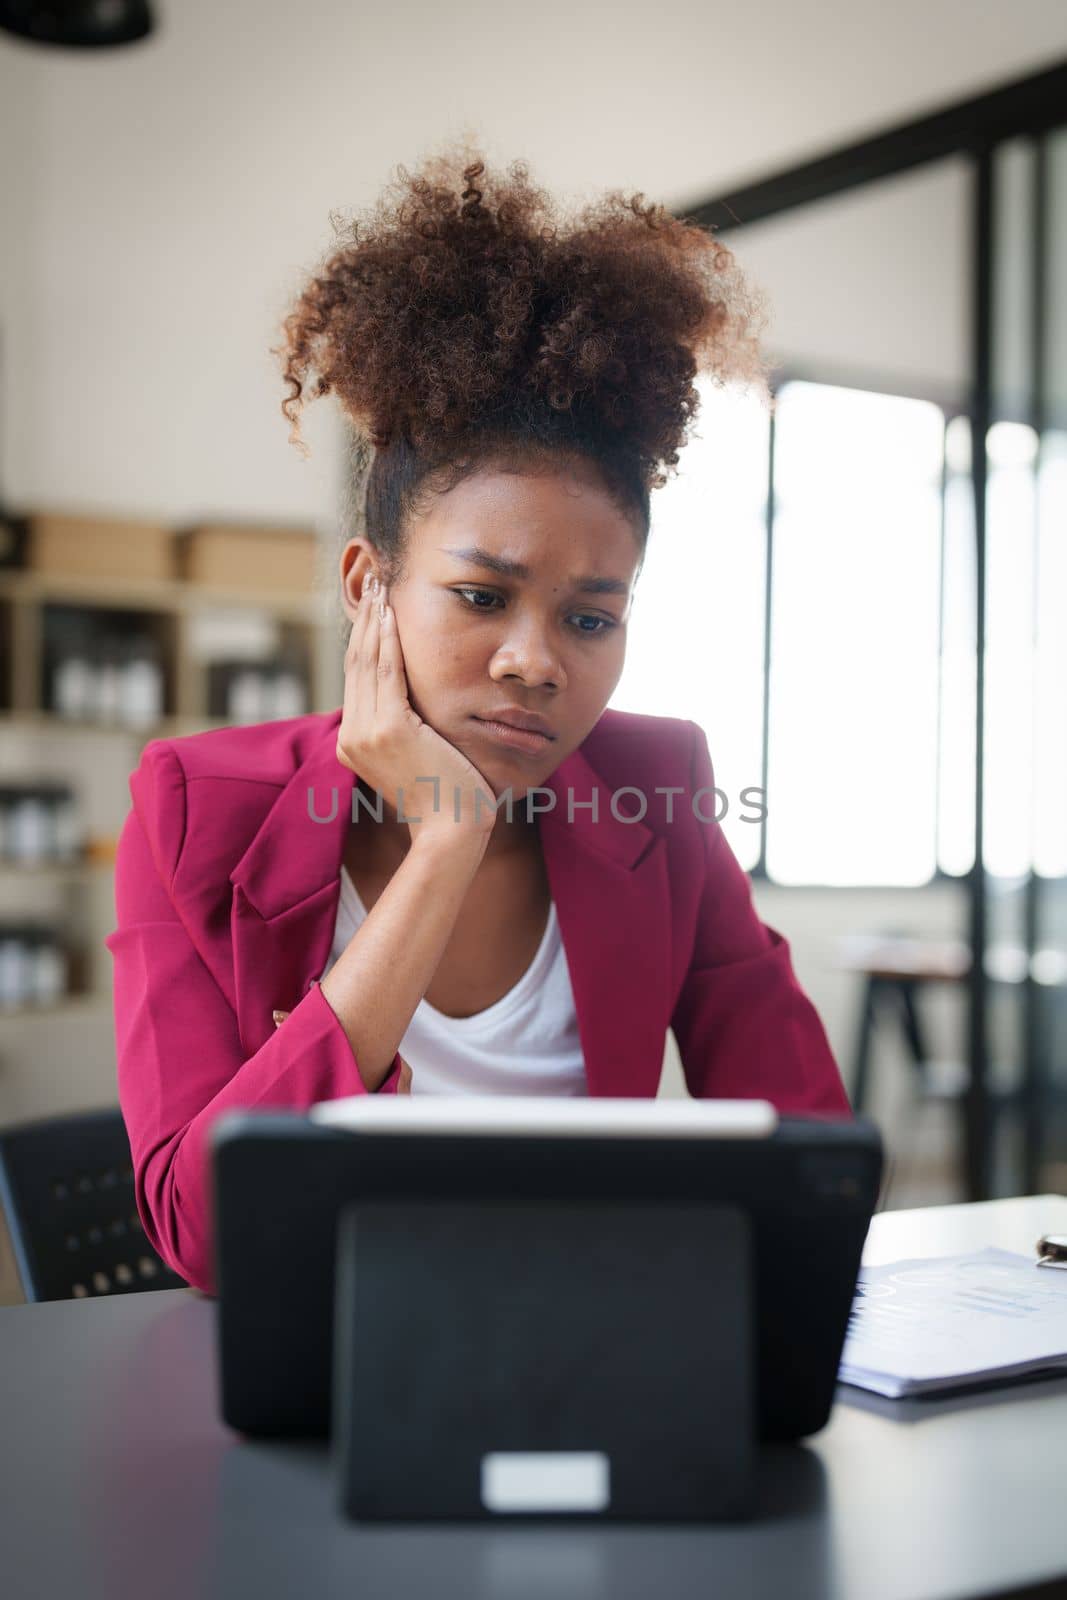 Portrait thoughtful confused young african american businesswoman looking at laptop. Stress while reading news, report or email. Online problem, finance mistake, troubleshooting.